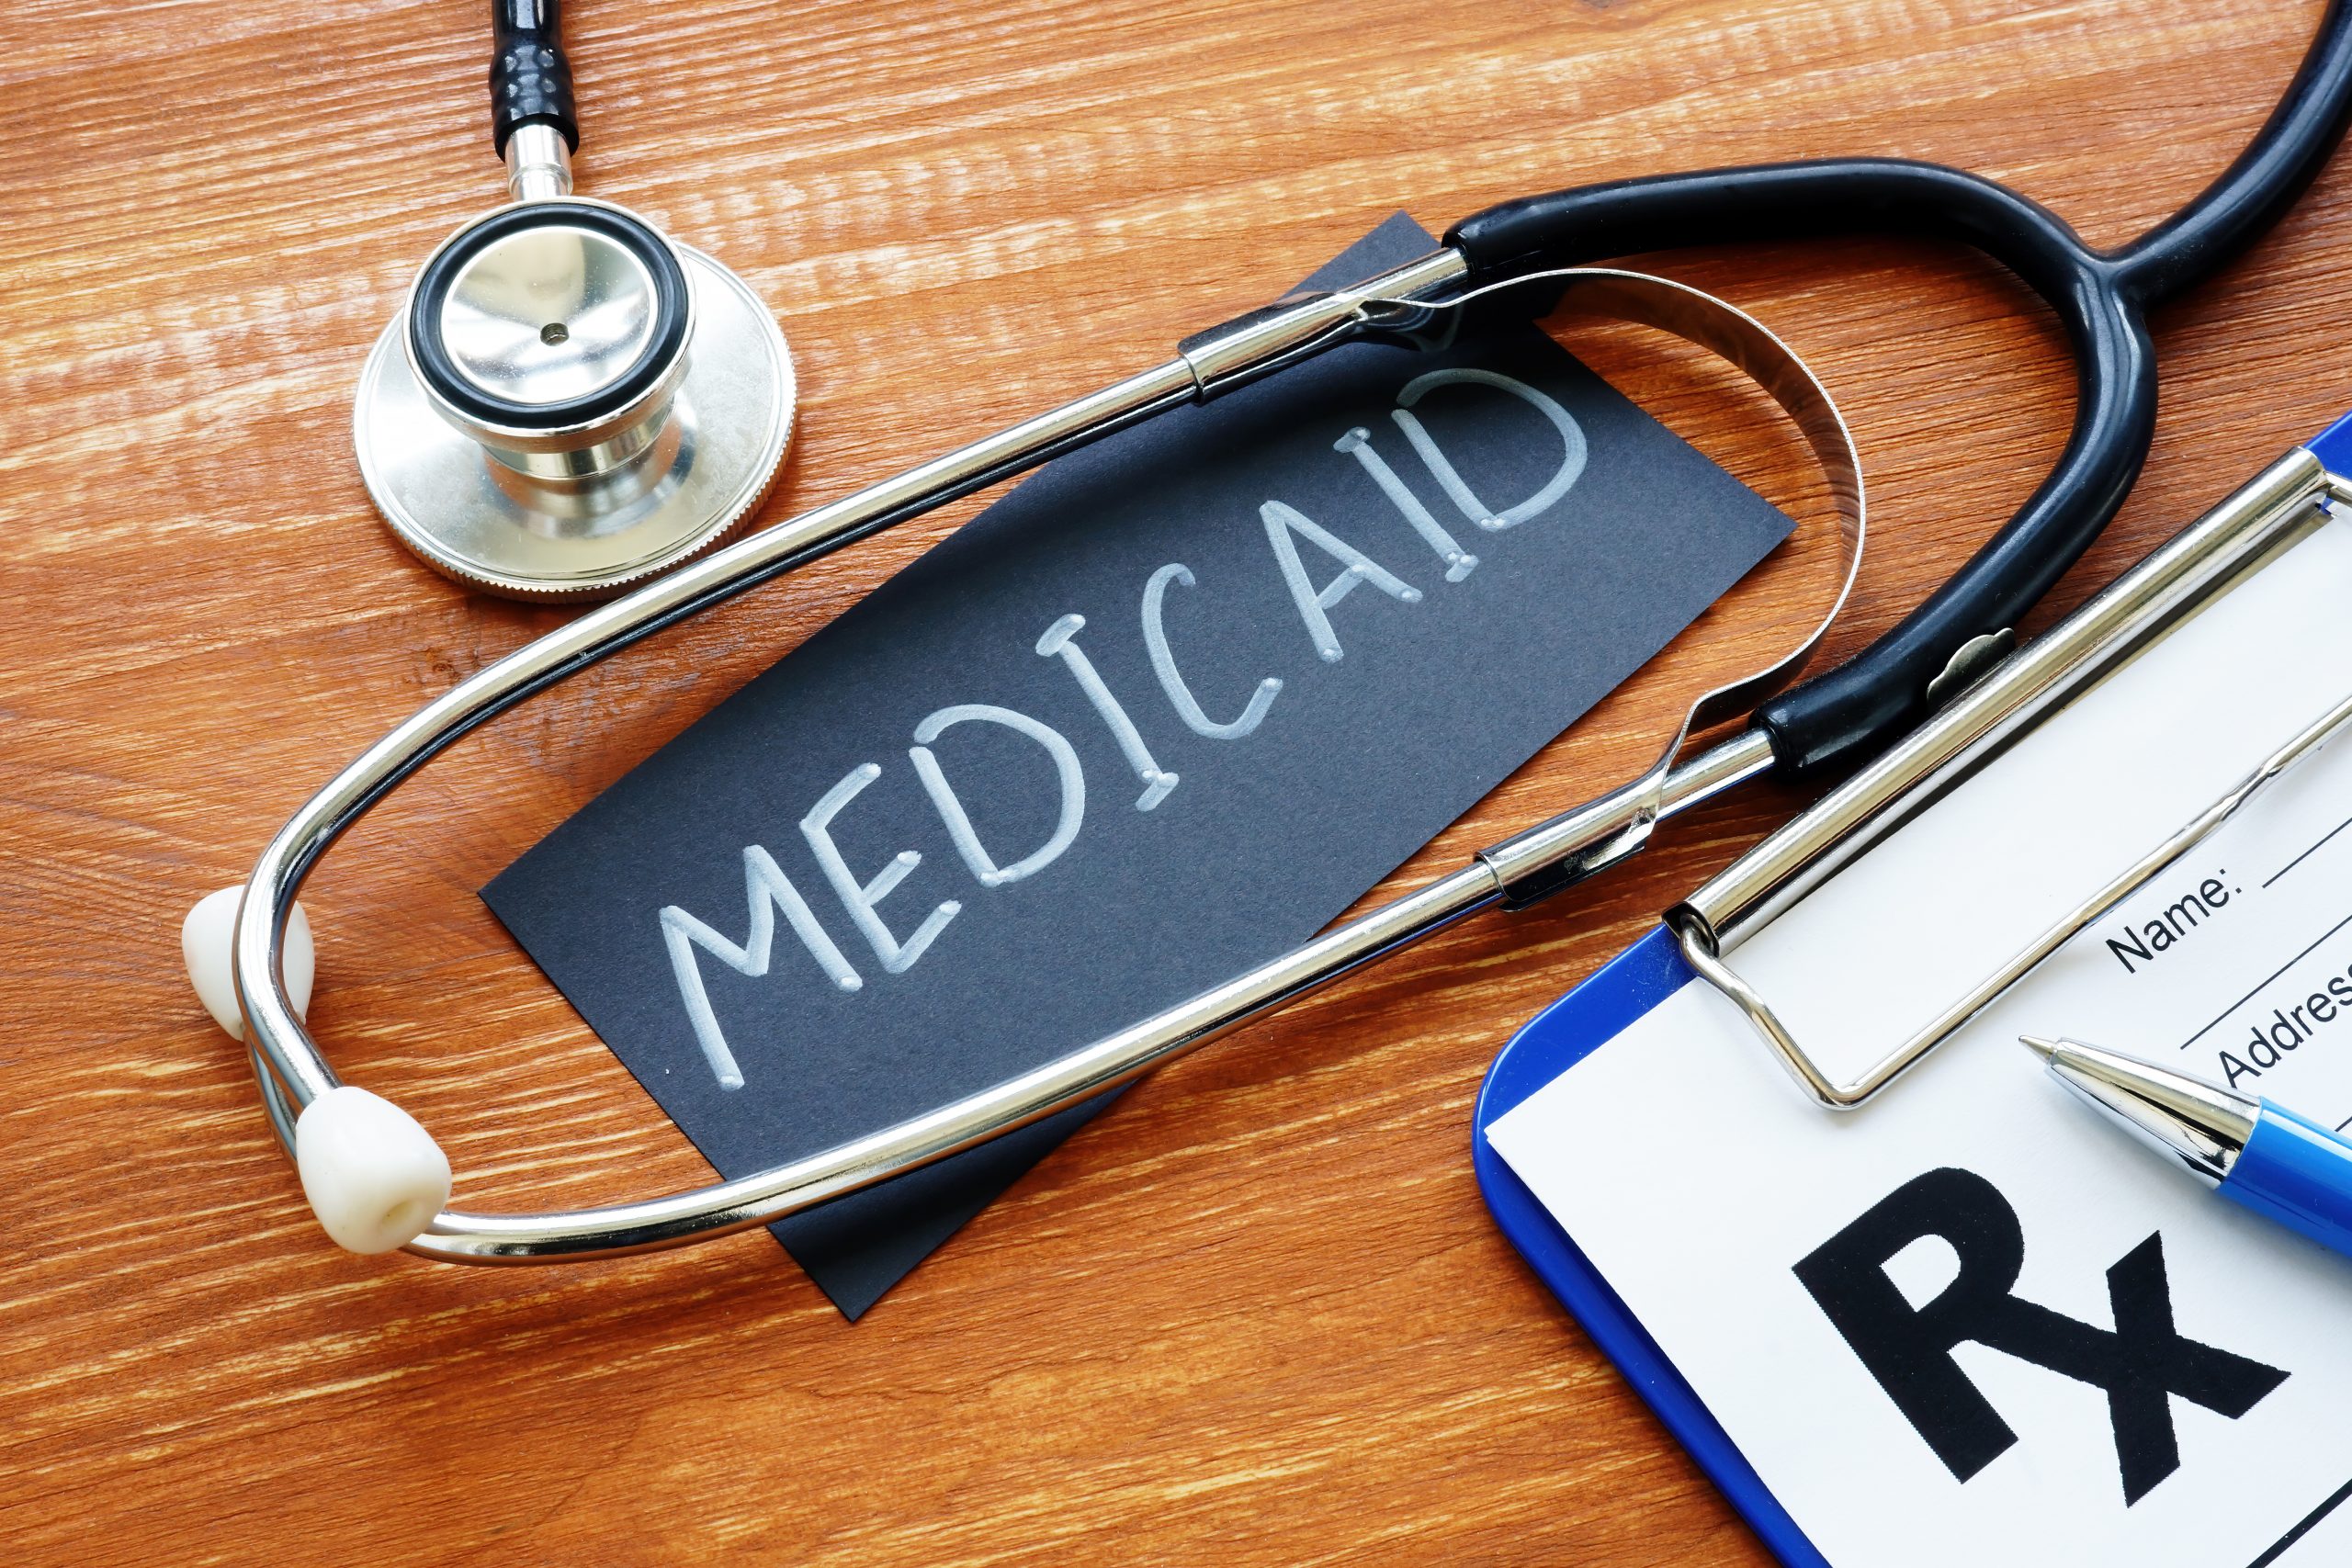 Medicaid is shown on the conceptual business photo